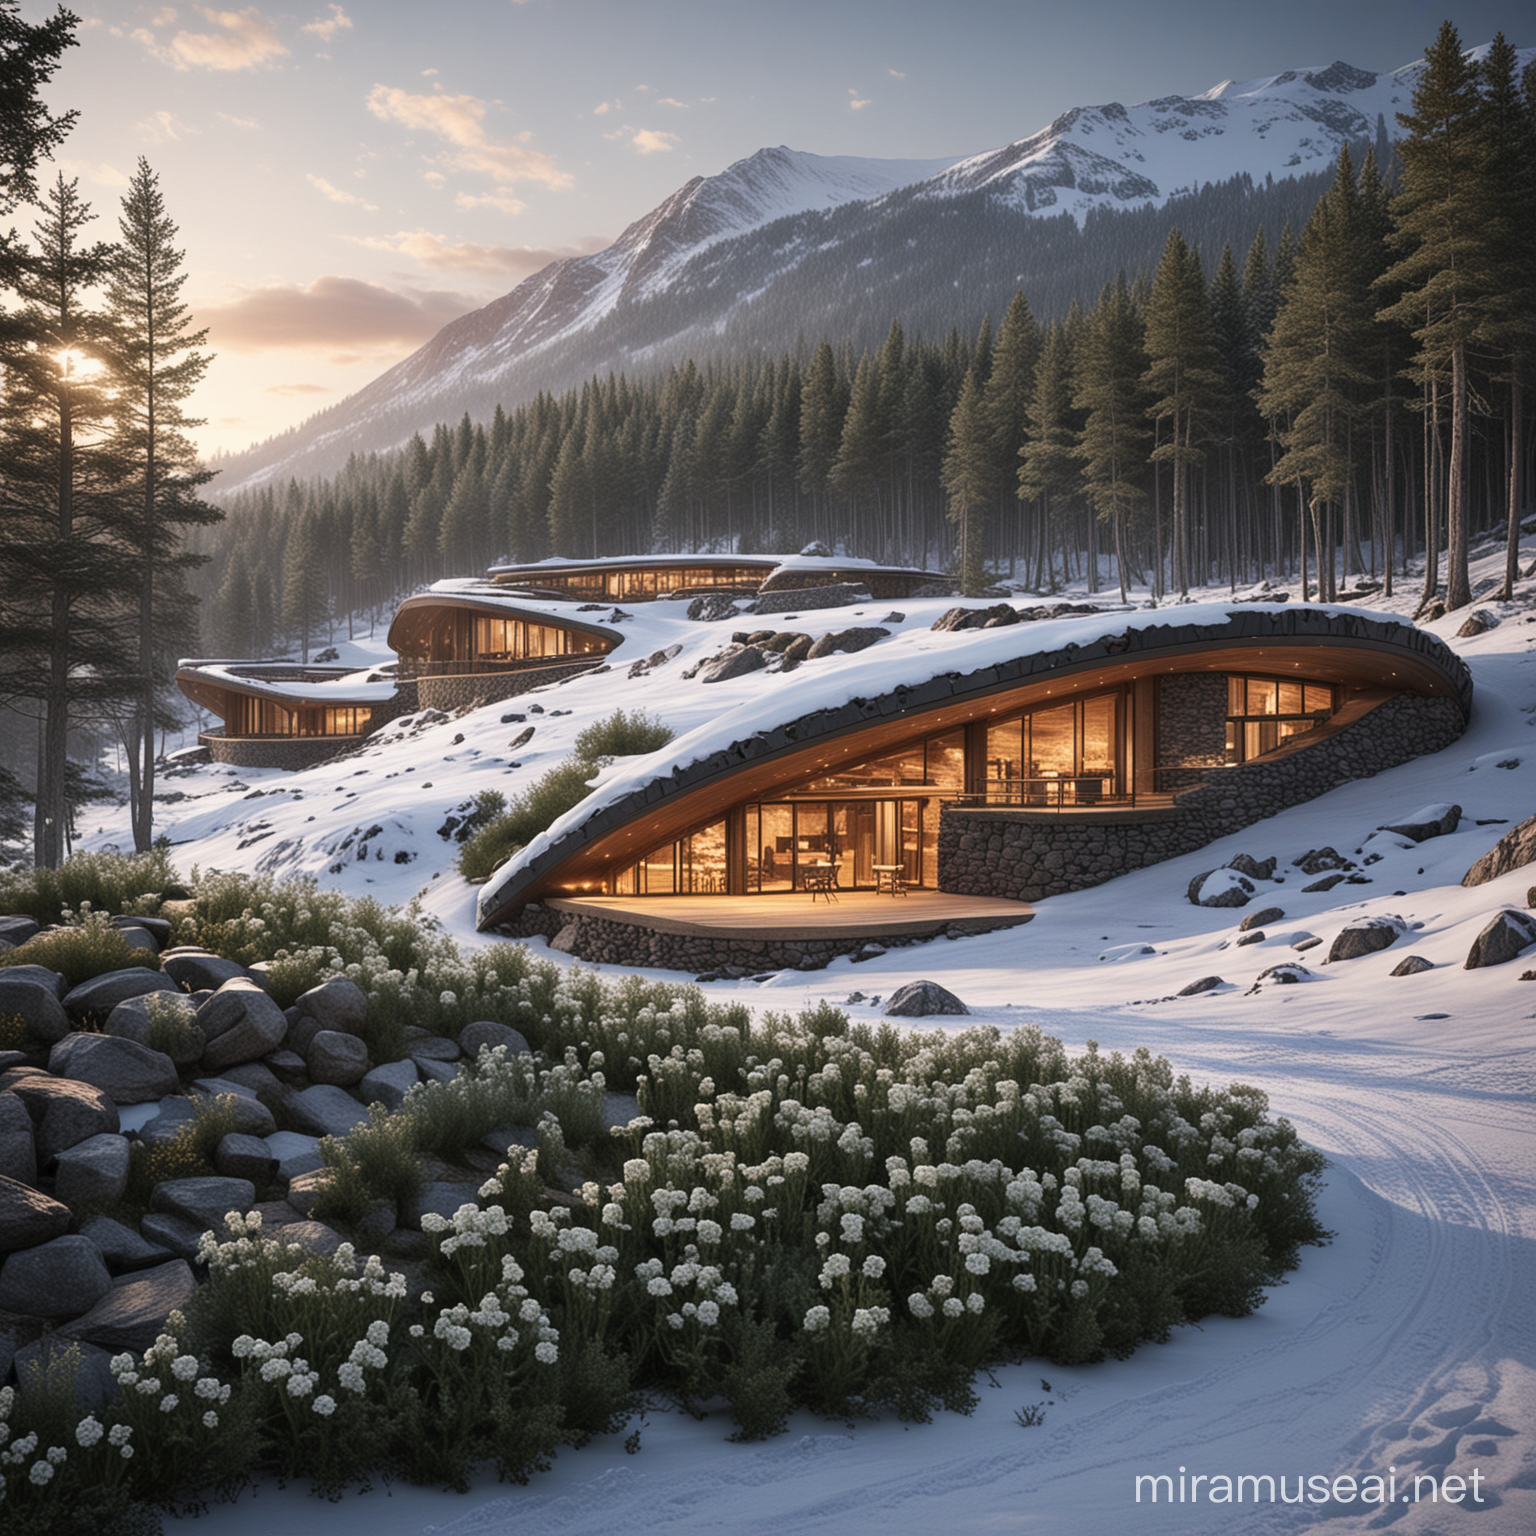 Building a ski lodge that resembles a settlement mound could be visually striking and tie into the historical and cultural context of the Viking Age. Incorporating vegetation and flowers around the lodge could add to its charm and create a welcoming environment. The use of rock-shaped lights in the shape of a figure eight to mimic Viking burial sites could be a creative and meaningful design element, highlighting the rich history of the area.